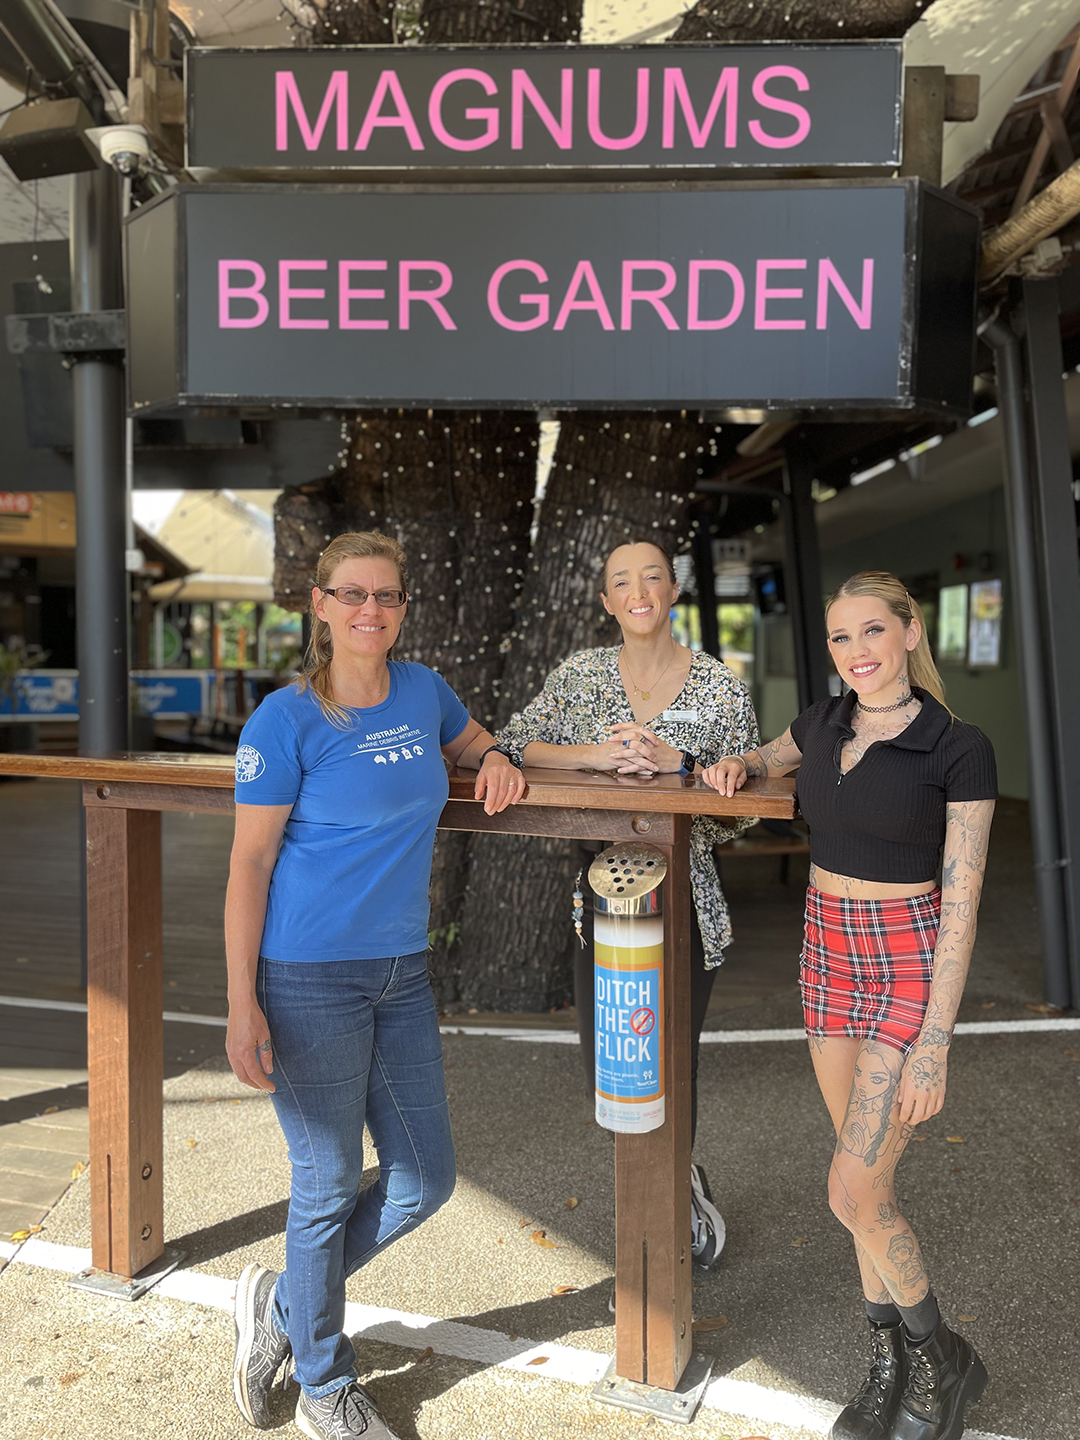 Tangaroa Blue CEO Heidi Tait, Healthy Rivers to Reef Chair Charlie Morgan, and Magnums Venue Manager Rebecca Cook standing next to a cigarette butt bin.